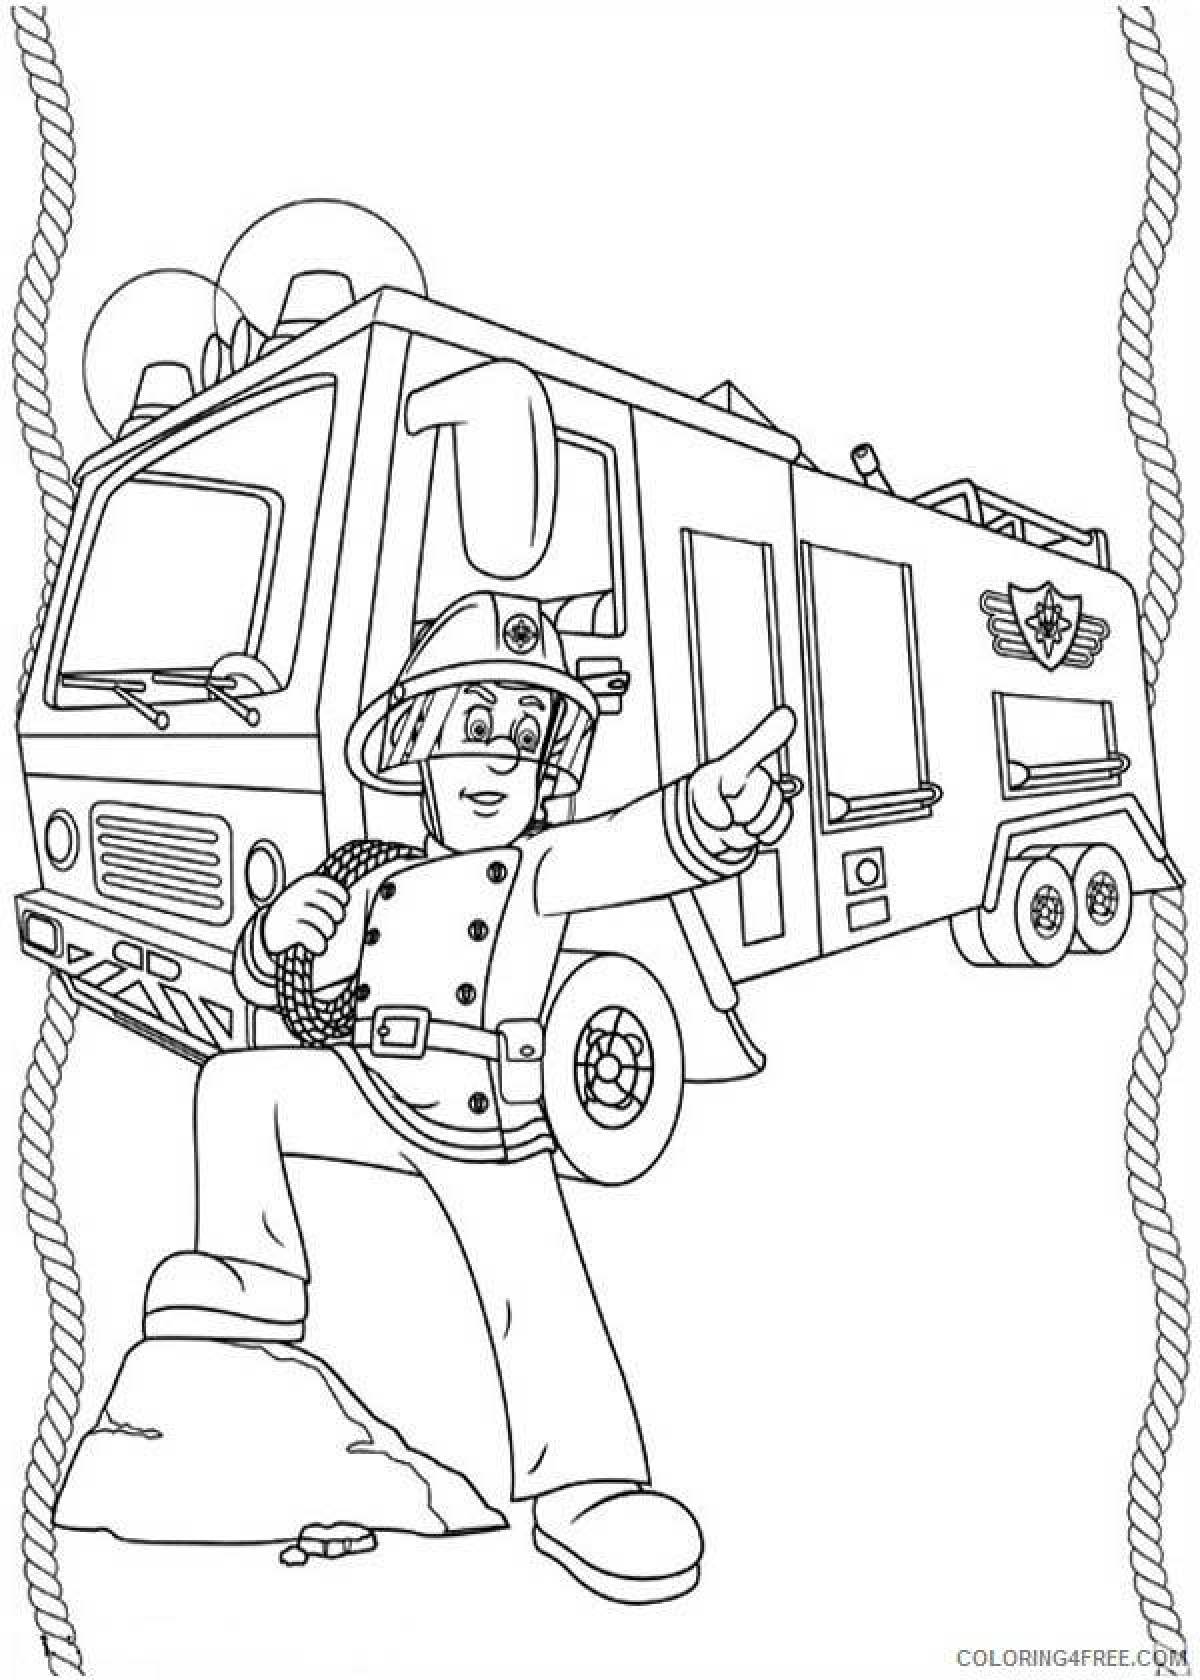 Entertaining coloring of the Ministry of Emergency Situations